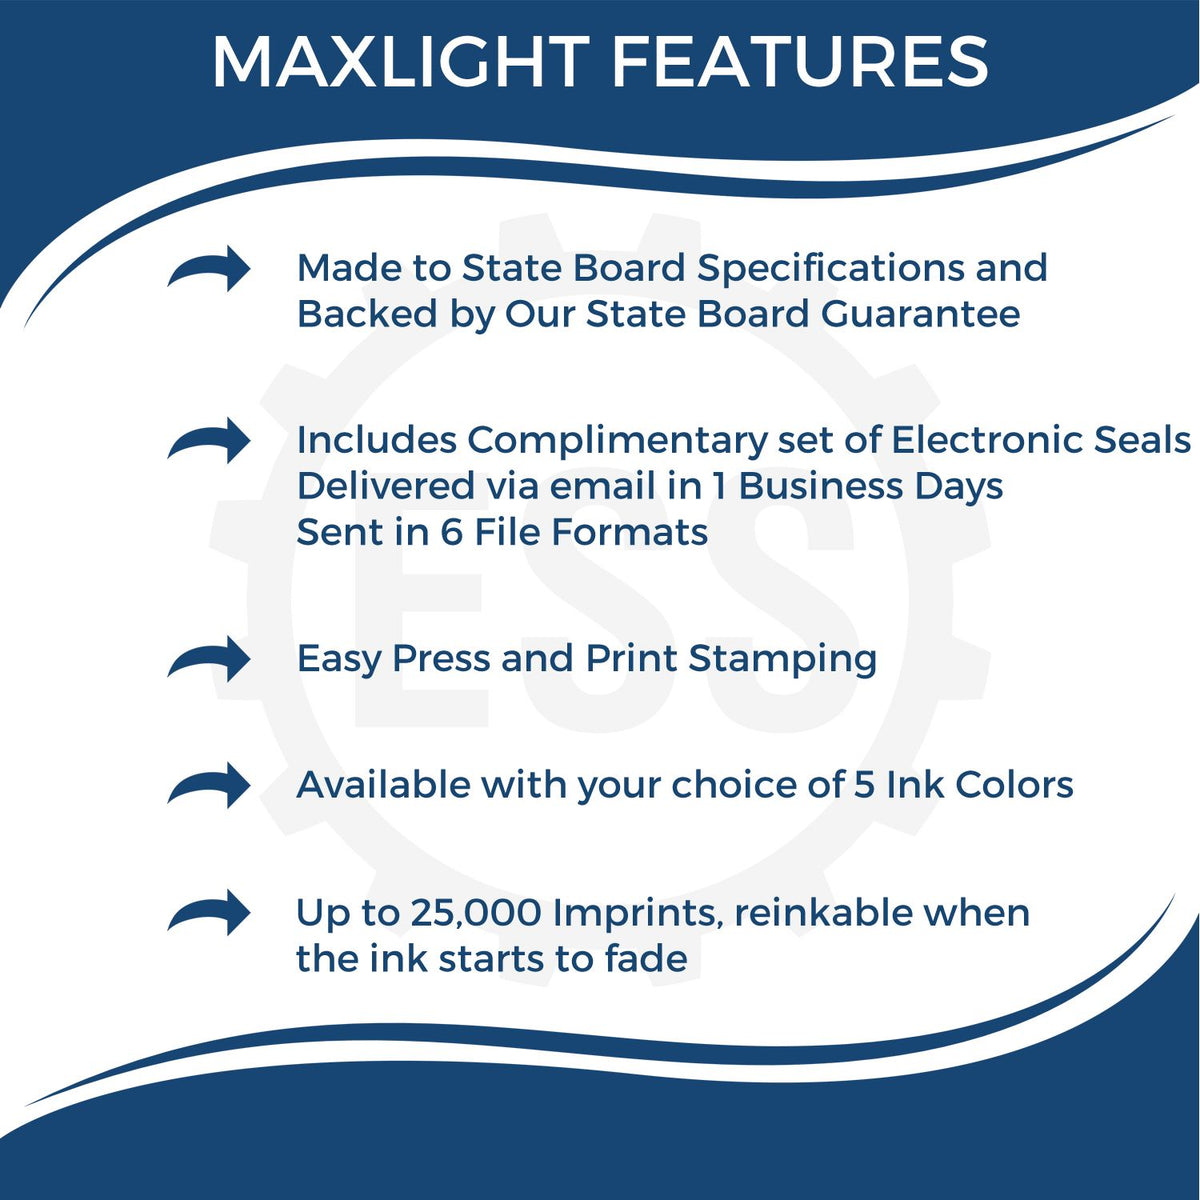 A picture of an infographic highlighting the selling points for the Premium MaxLight Pre-Inked Georgia Landscape Architectural Stamp